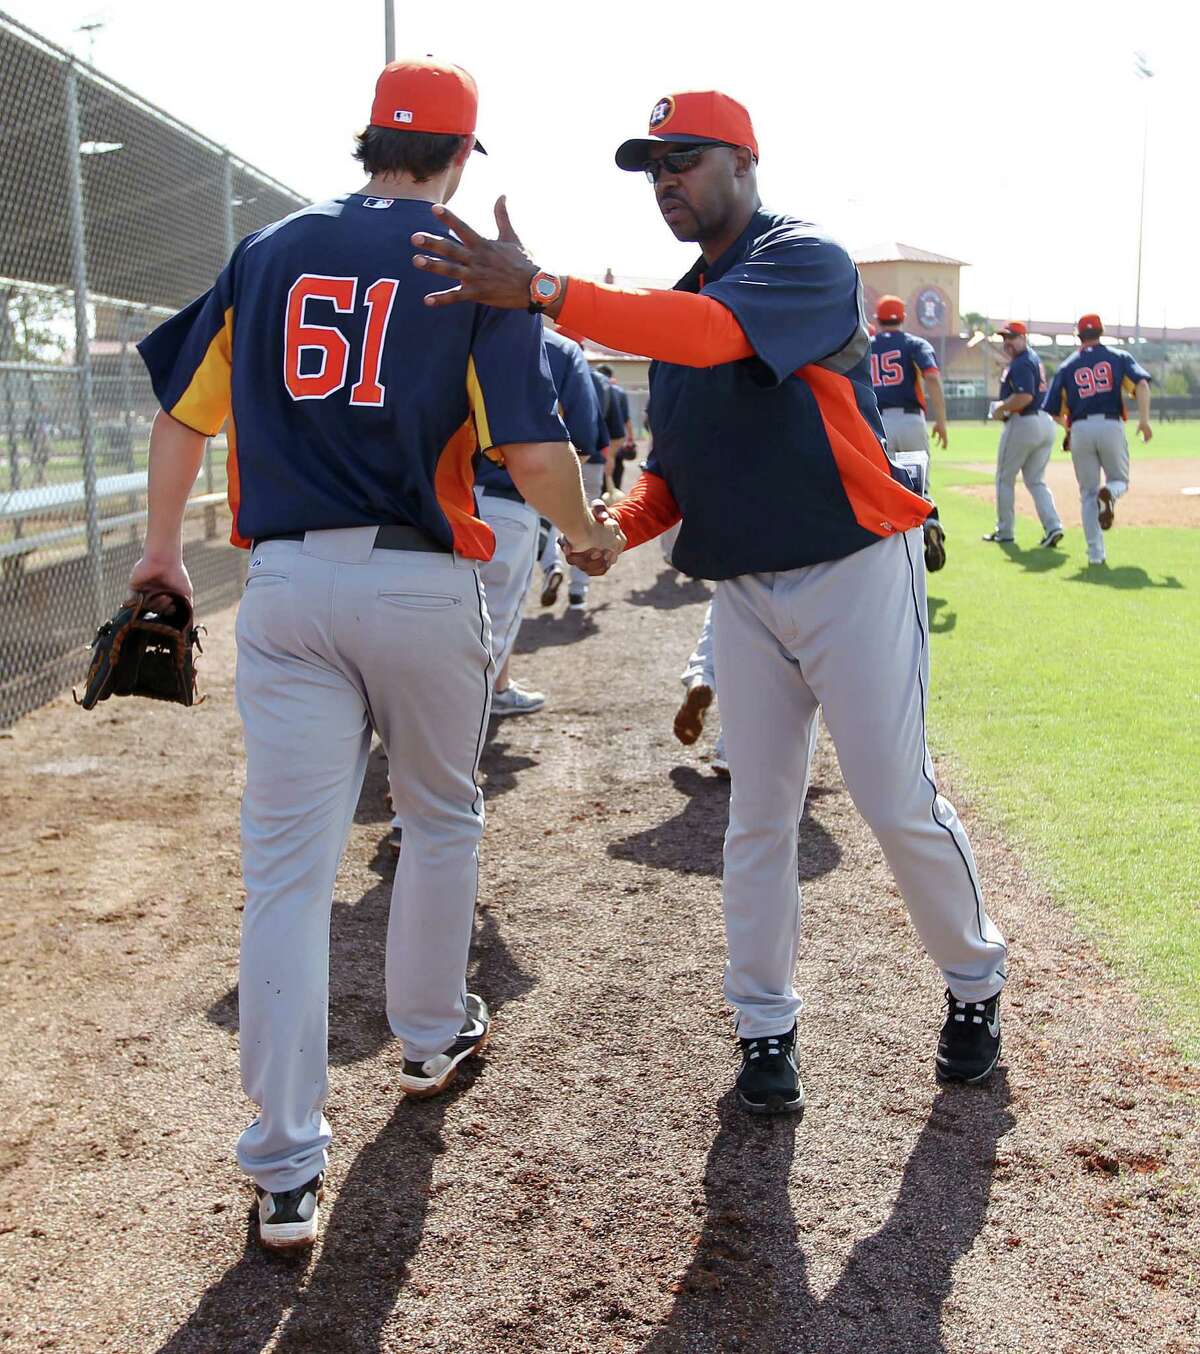 New Astros manager Bo Porter (right) shakes pitcher Ross Seaton's hand after drills Wednesday in Kissimmee, Fla. Porter's squad is preparing for its first season in the American League.